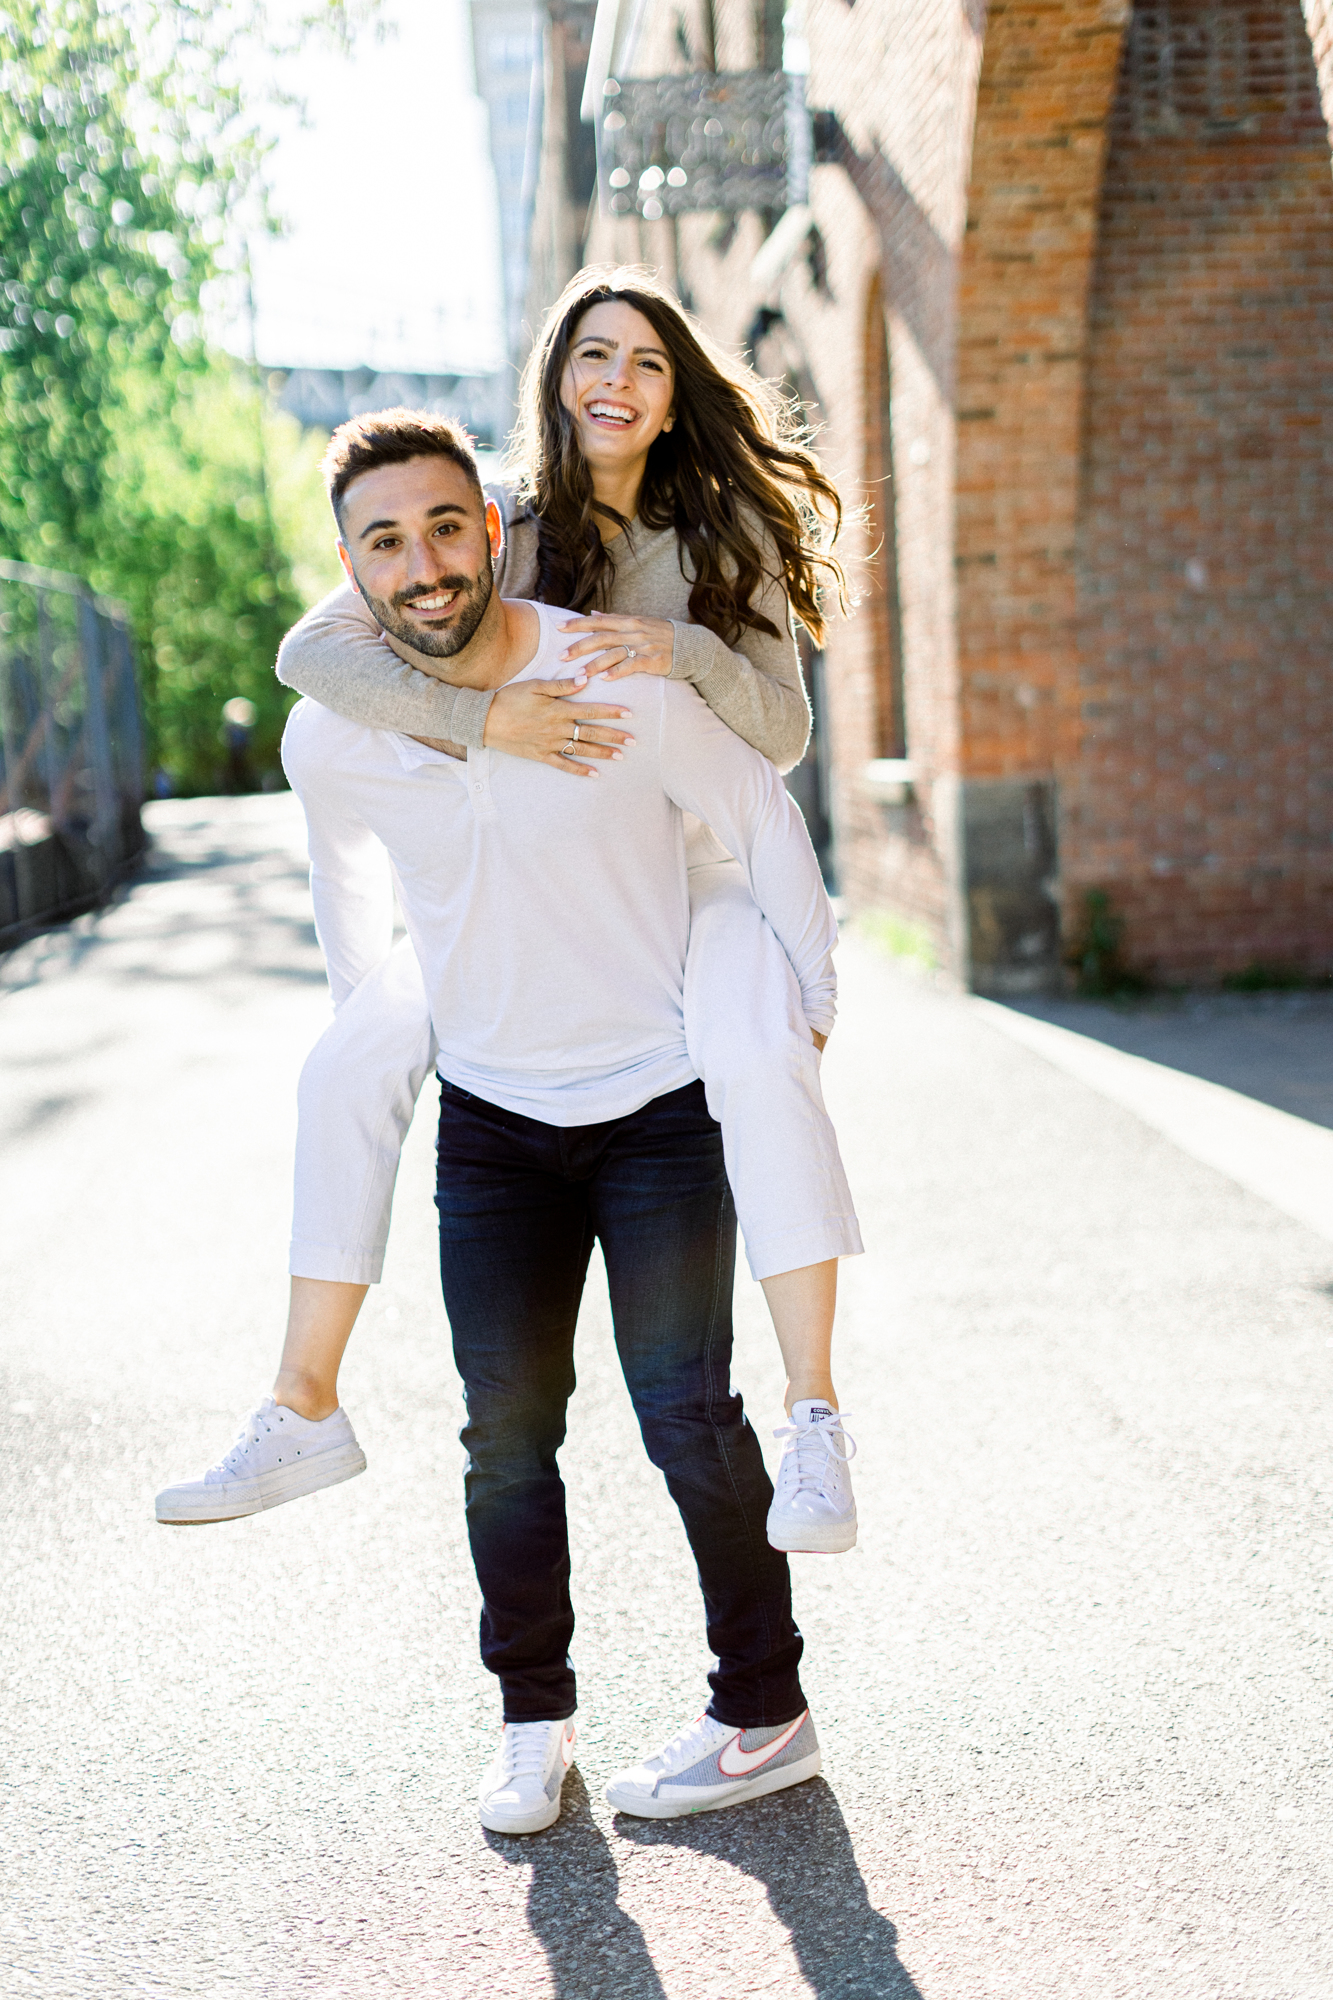 Striking Pose Ideas for your Engagement Session